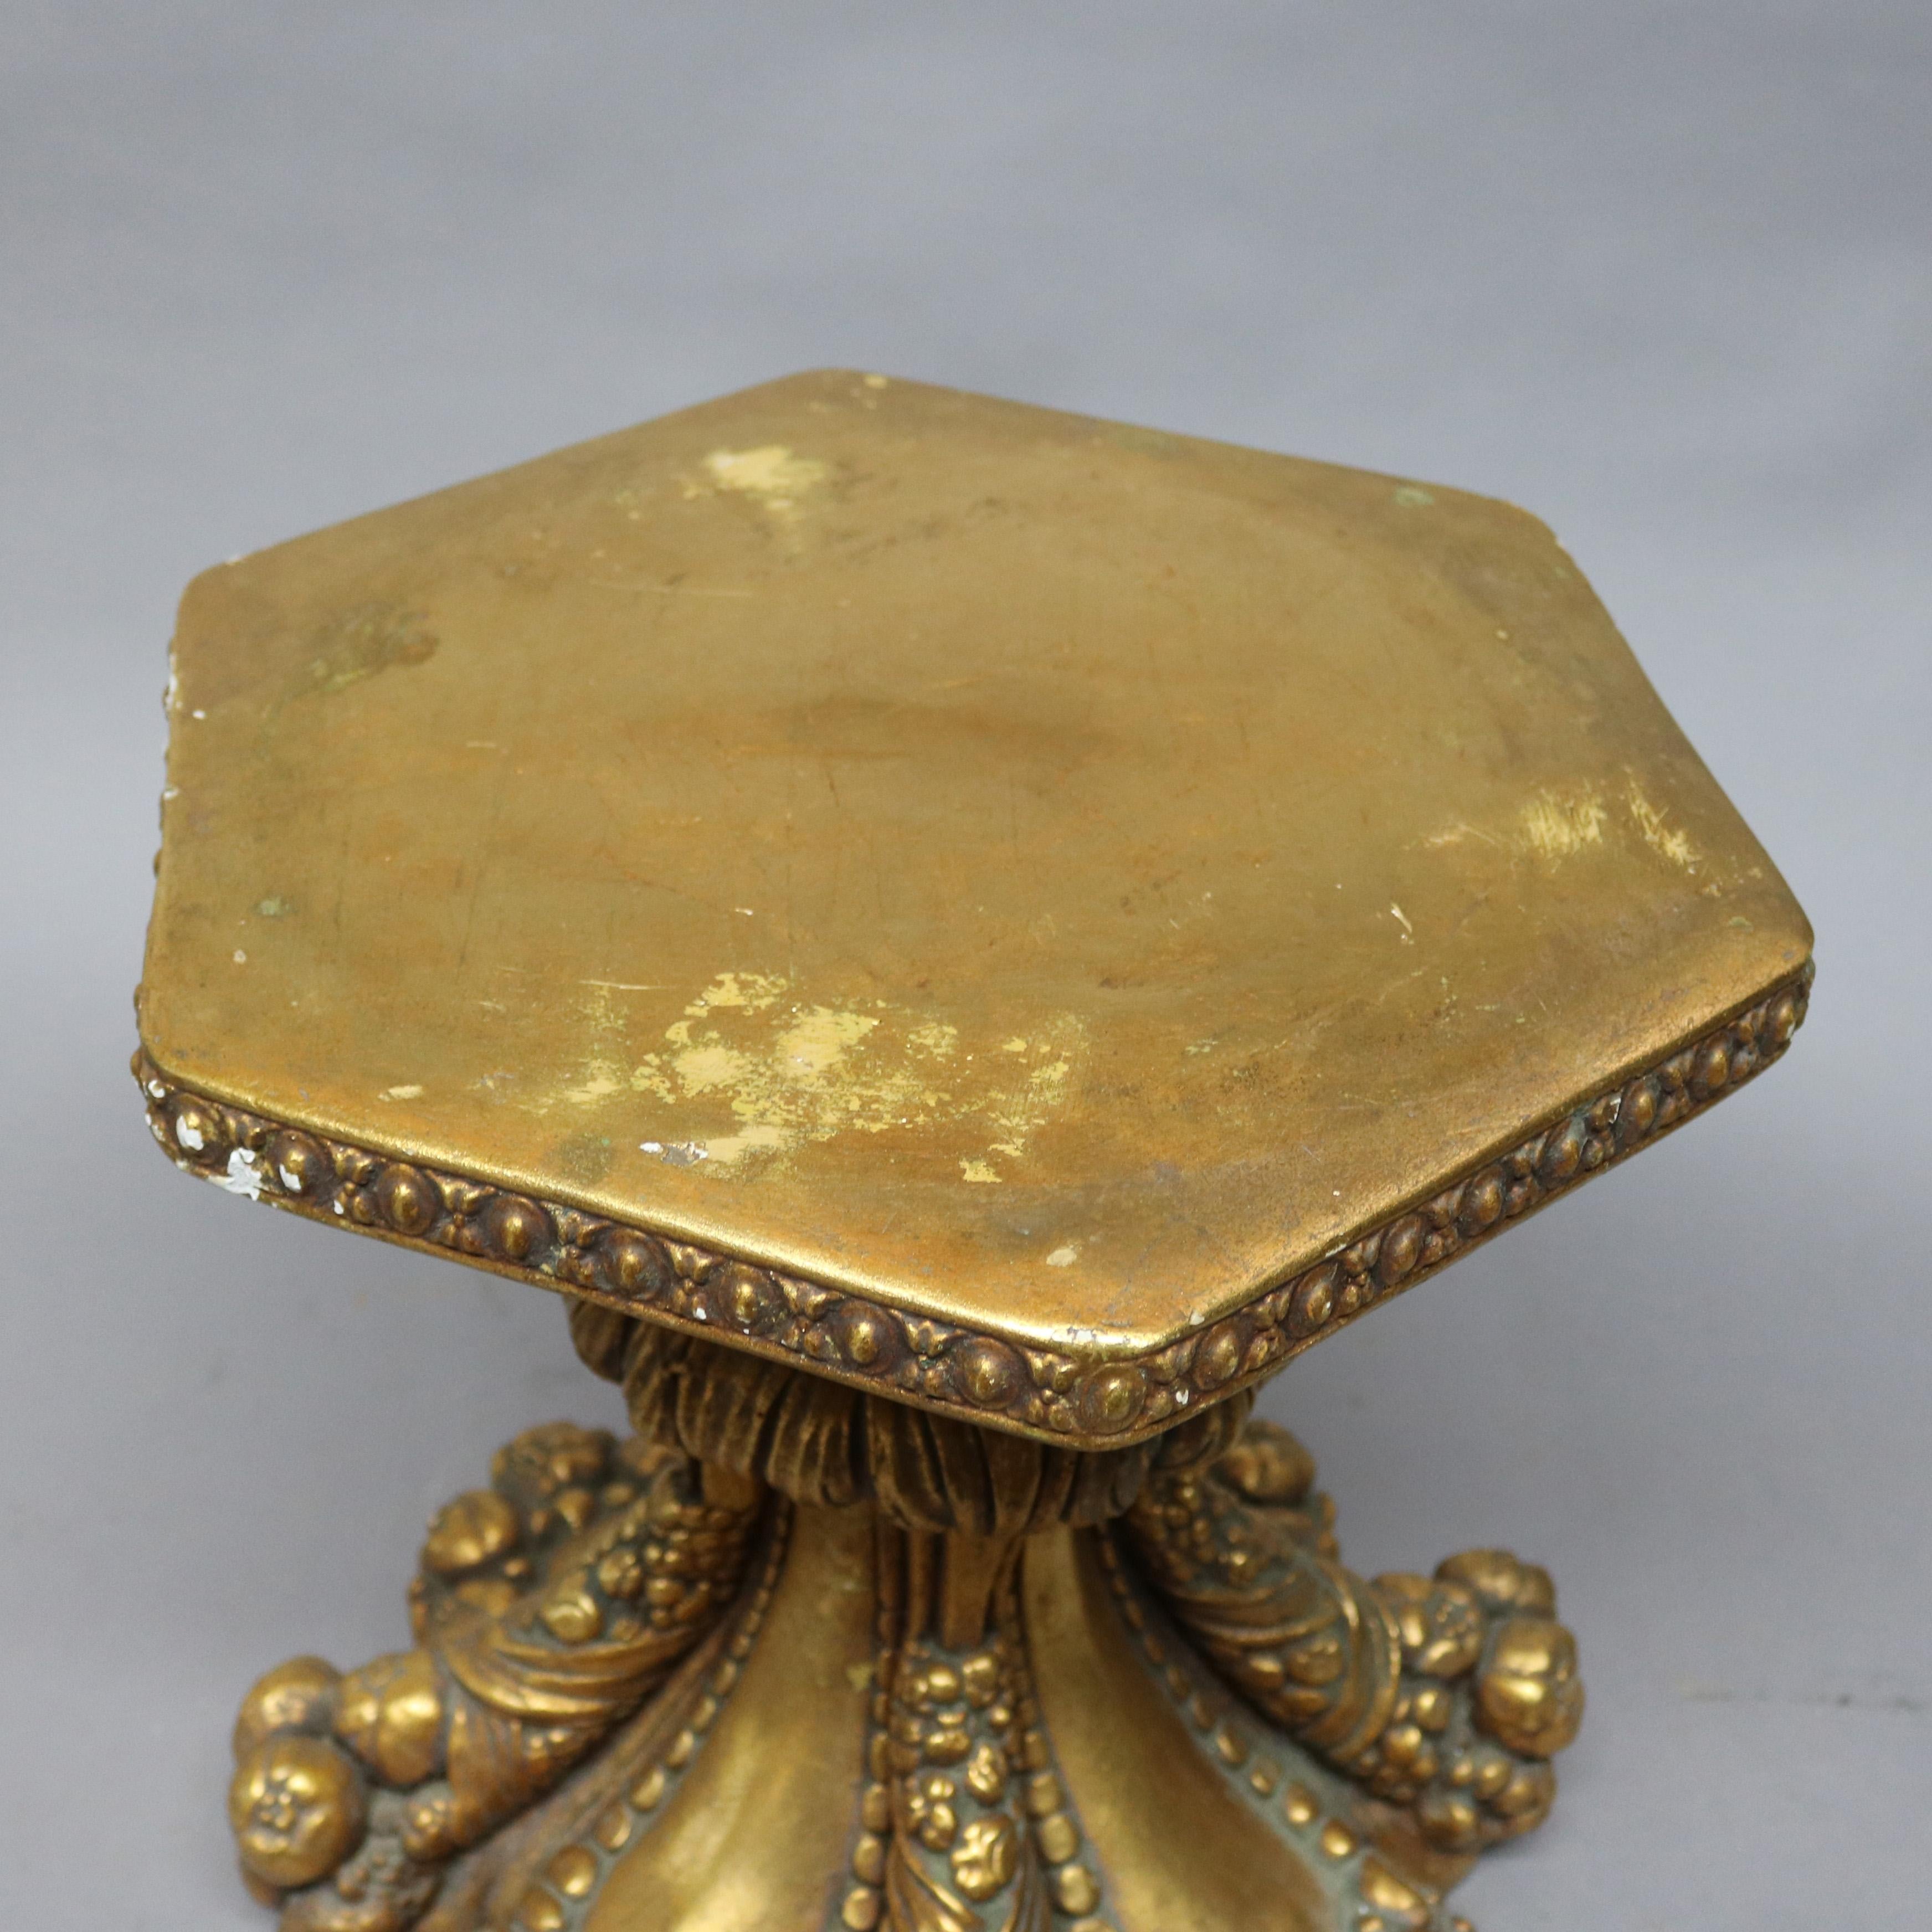 A vintage Hollywood Regency pedestal or side table offers gilt plaster construction with hexagonal top surmounting stylized cornucopia form base, circa 1950.

Measures - 16.5